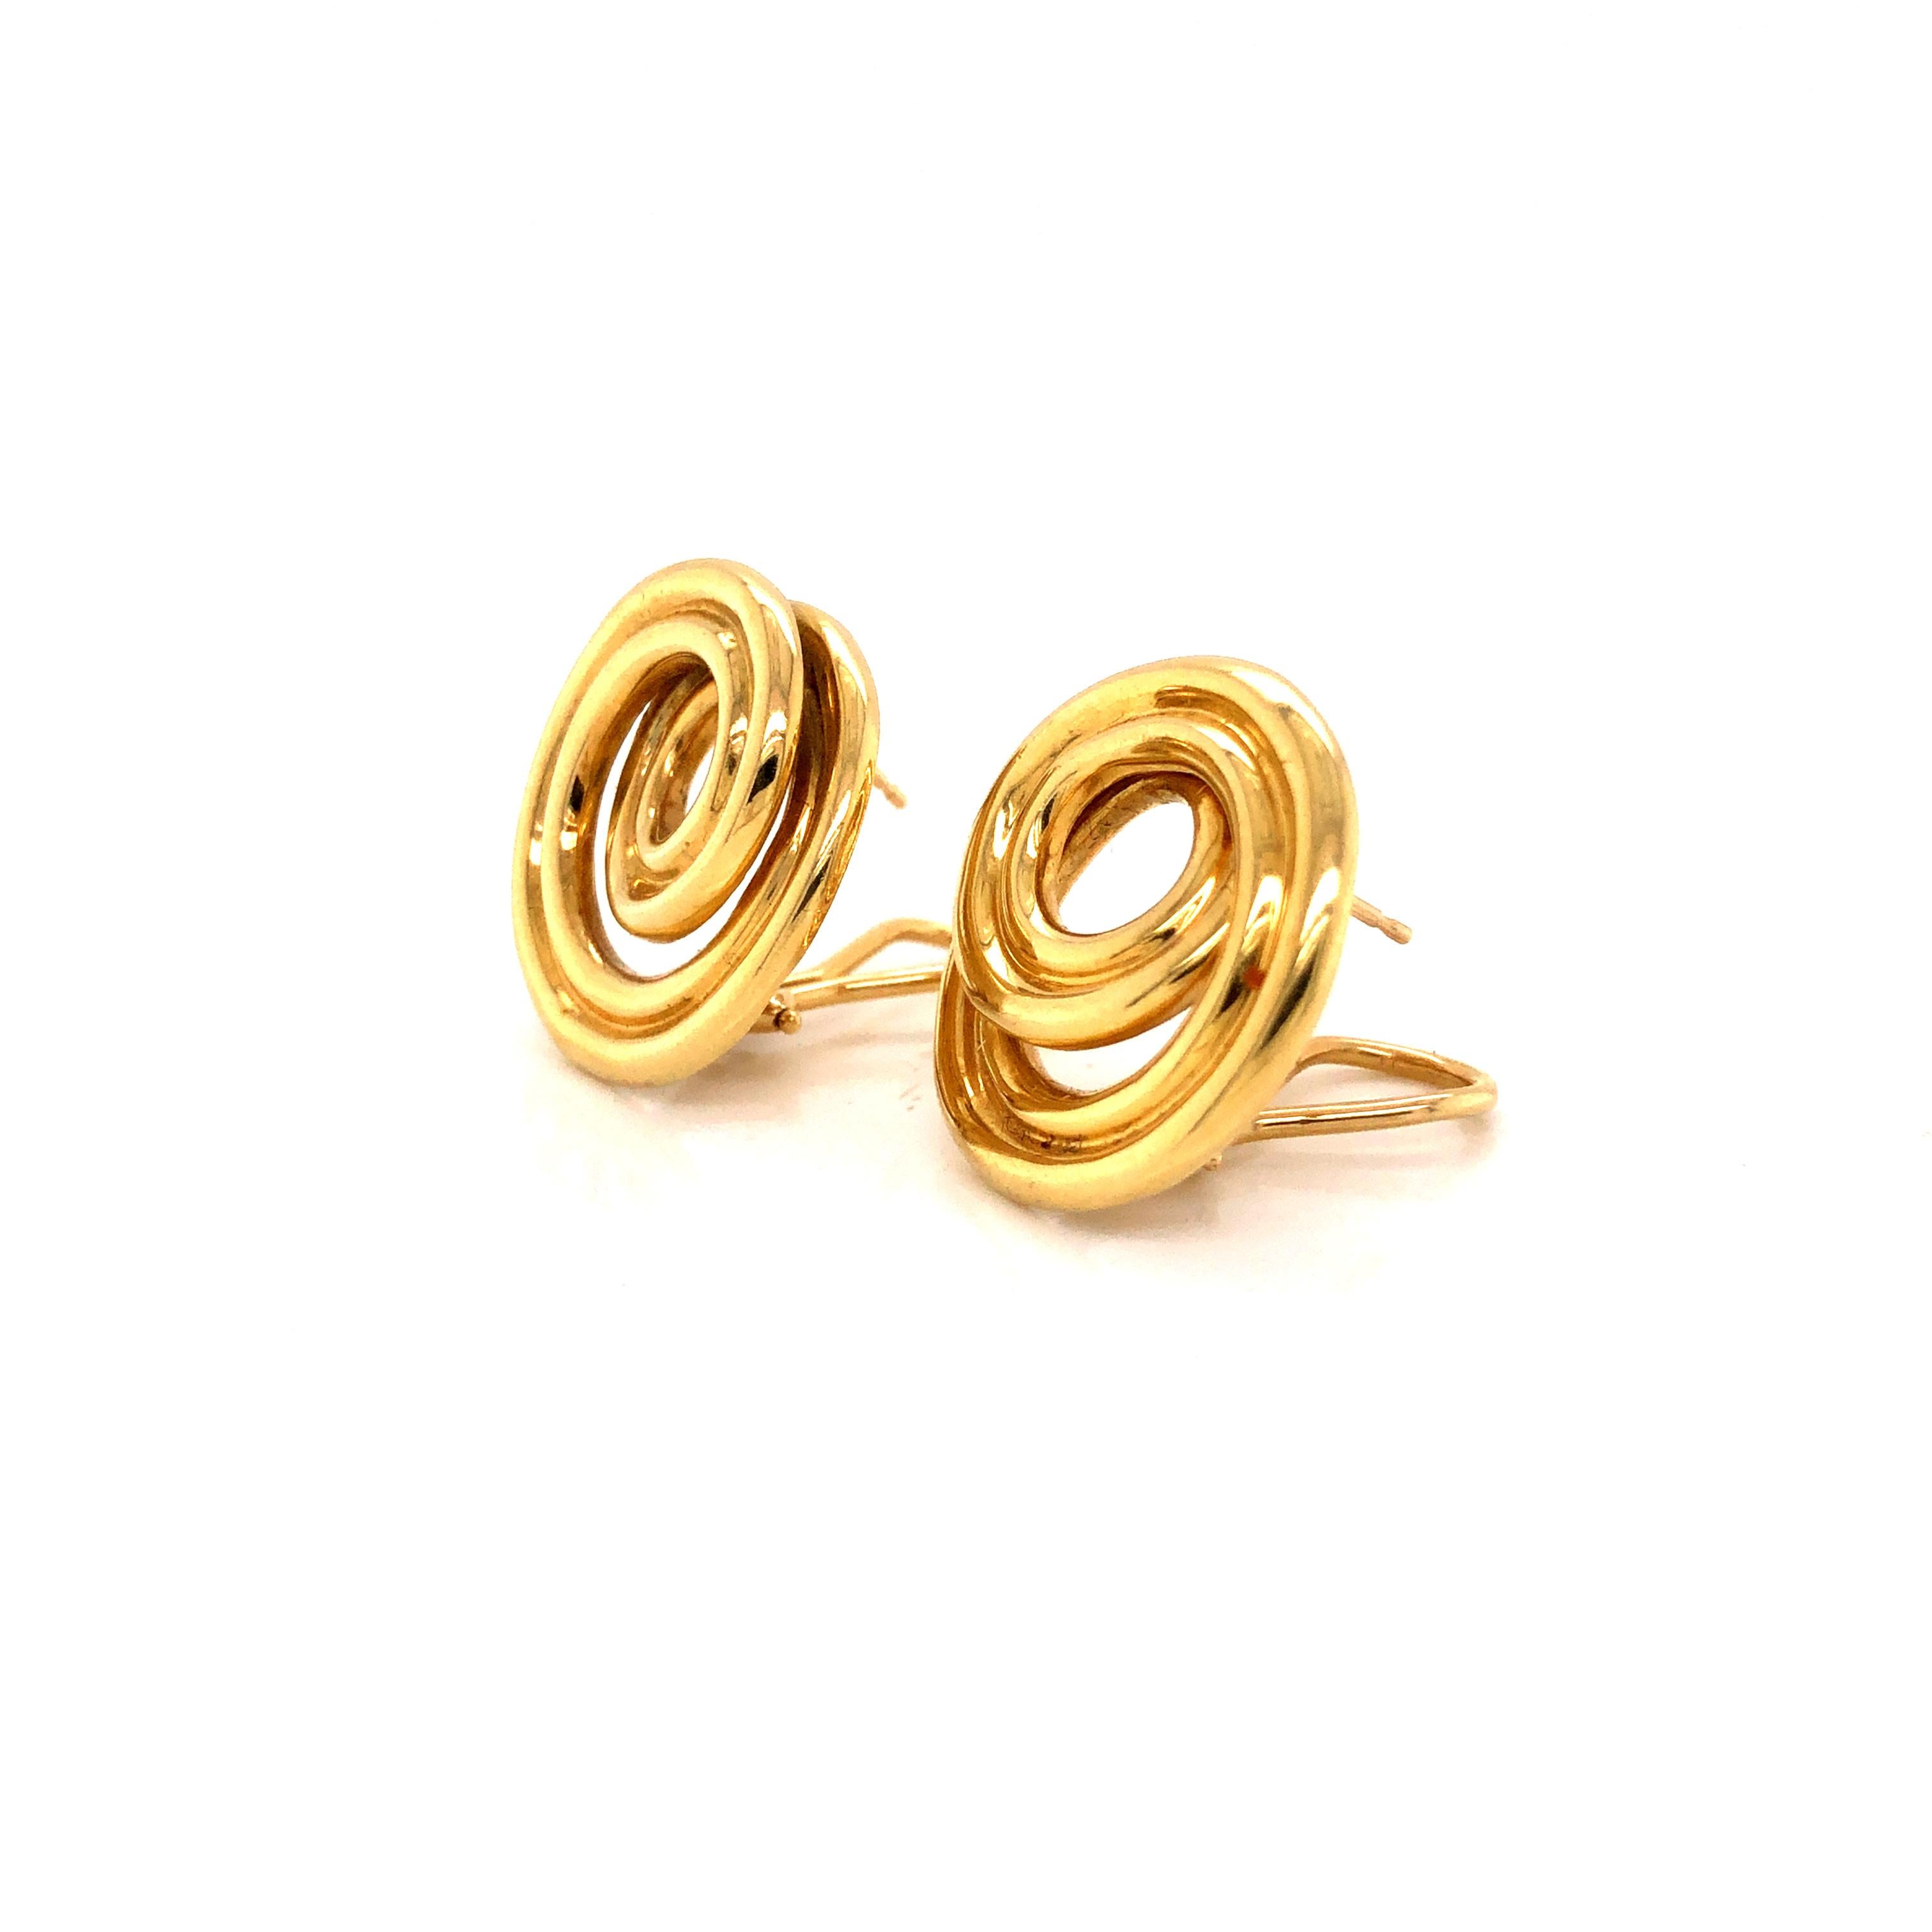 Beautiful earrings from famed jewelry house Tiffany & Co. These retro earrings are crafted in 18k yellow gold.  The pair displays a brilliant swirling pattern in a circular design.  The pair has a 3-D feel as the swirls come off the design. The pair